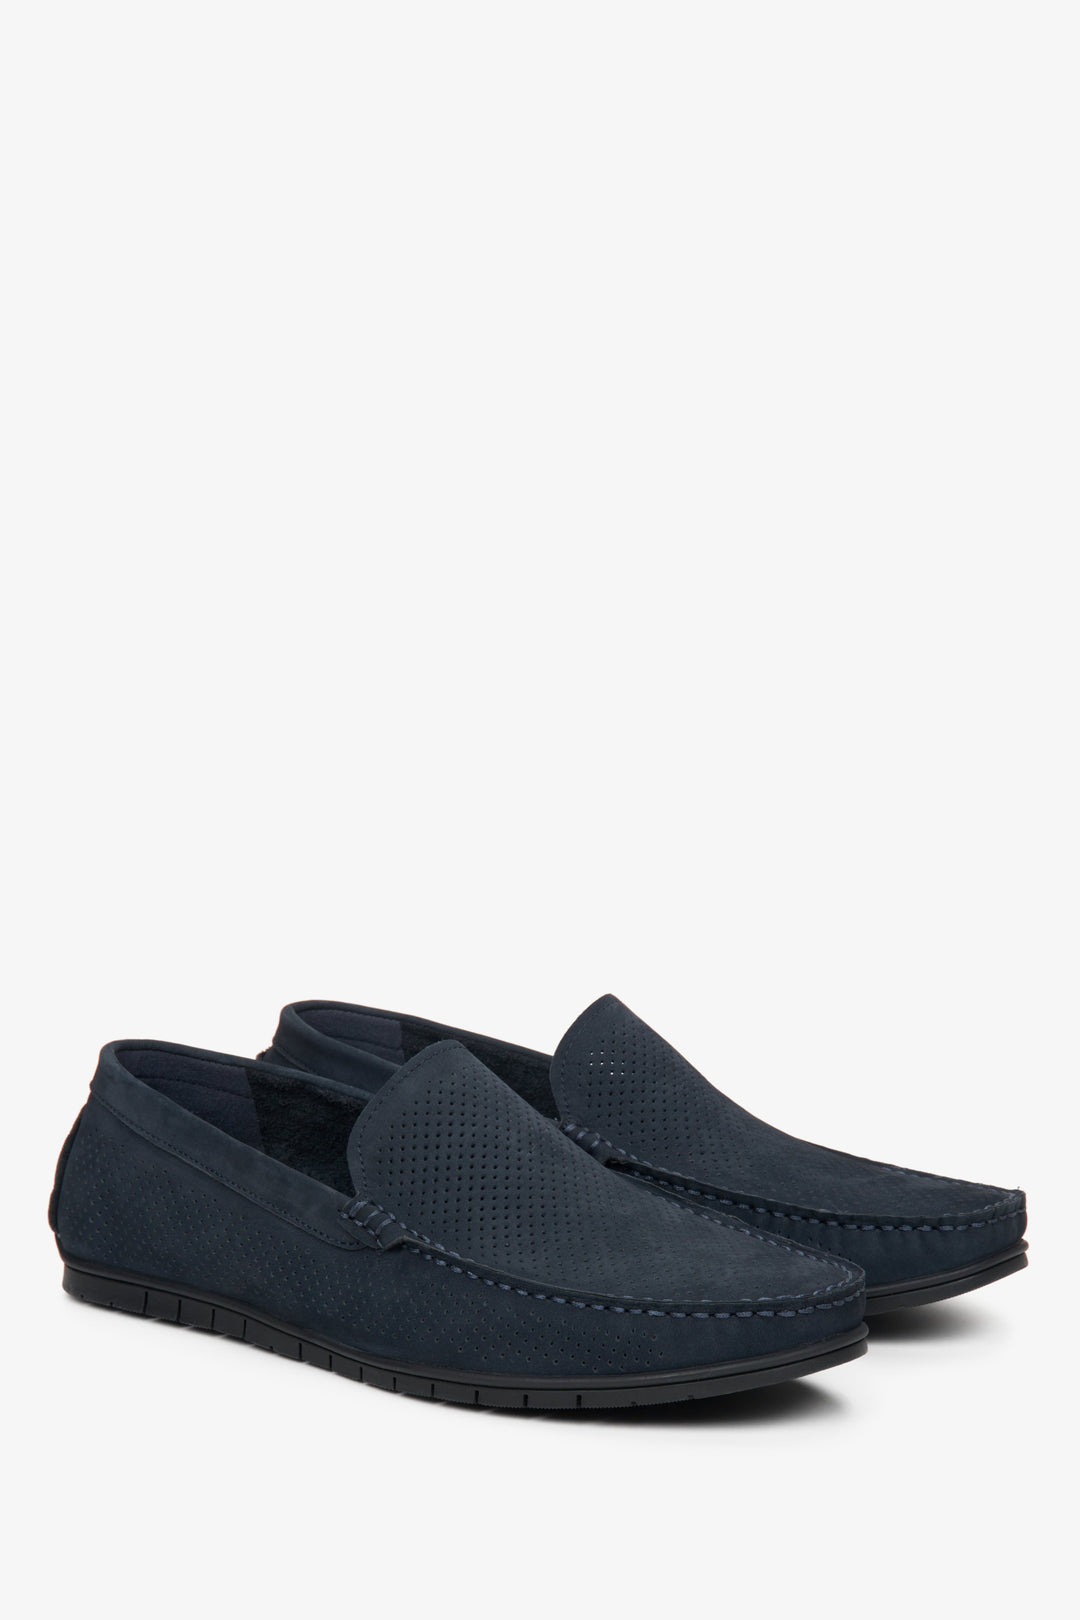 Estro men's navy blue loafers for fall and spring, with perforation - presentation of the toe and side seam of the shoes.